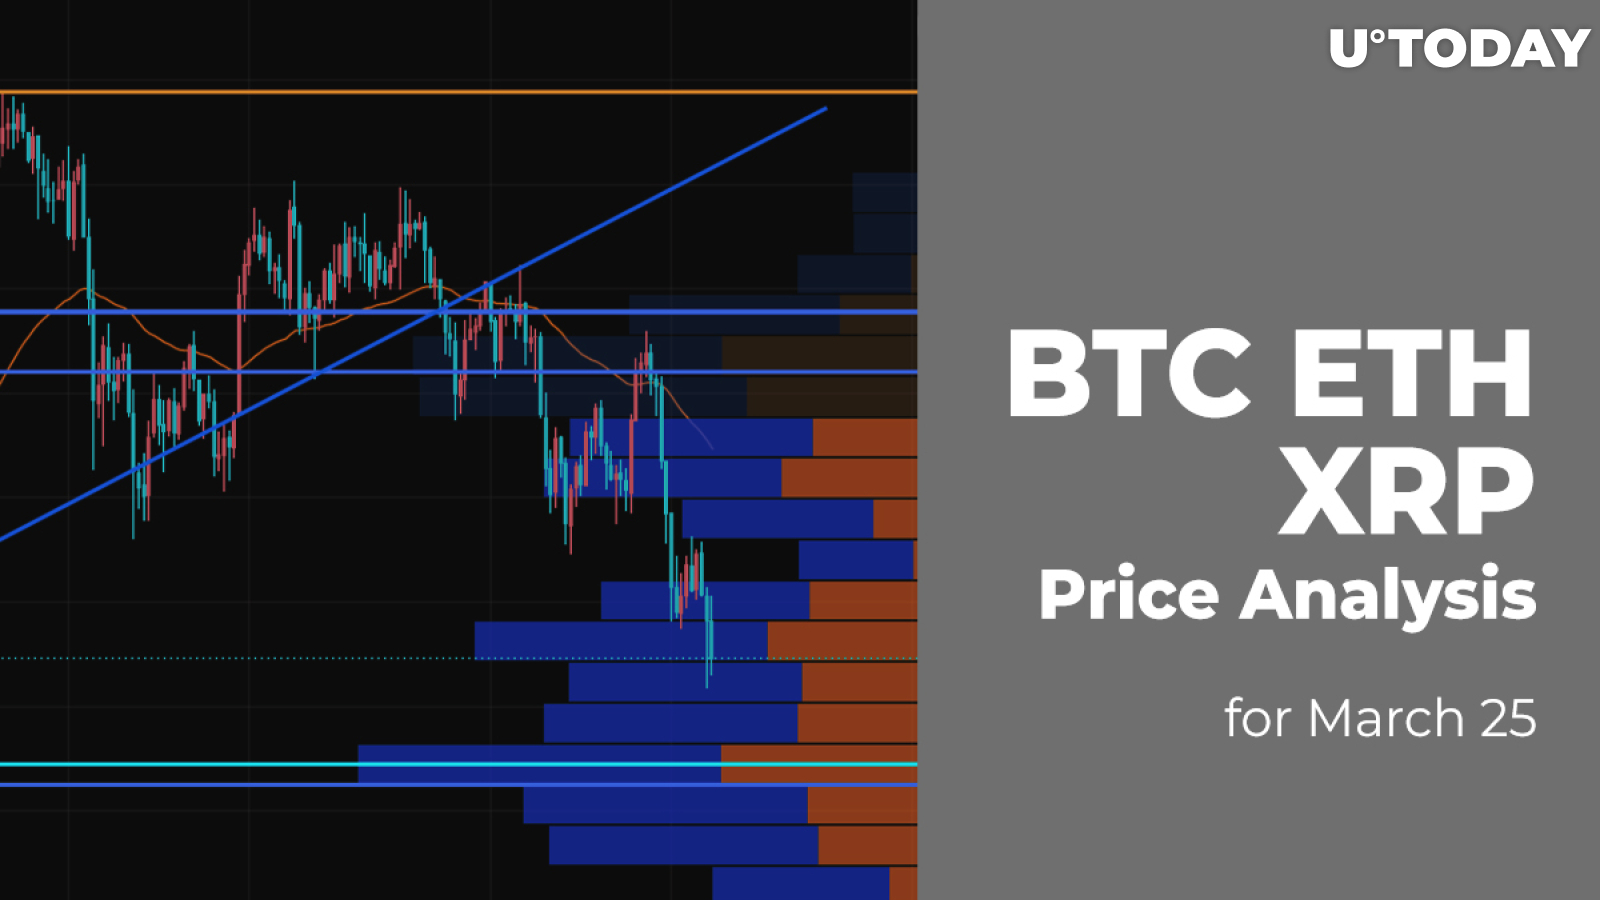 BTC, ETH and XRP Price Analysis for March 25